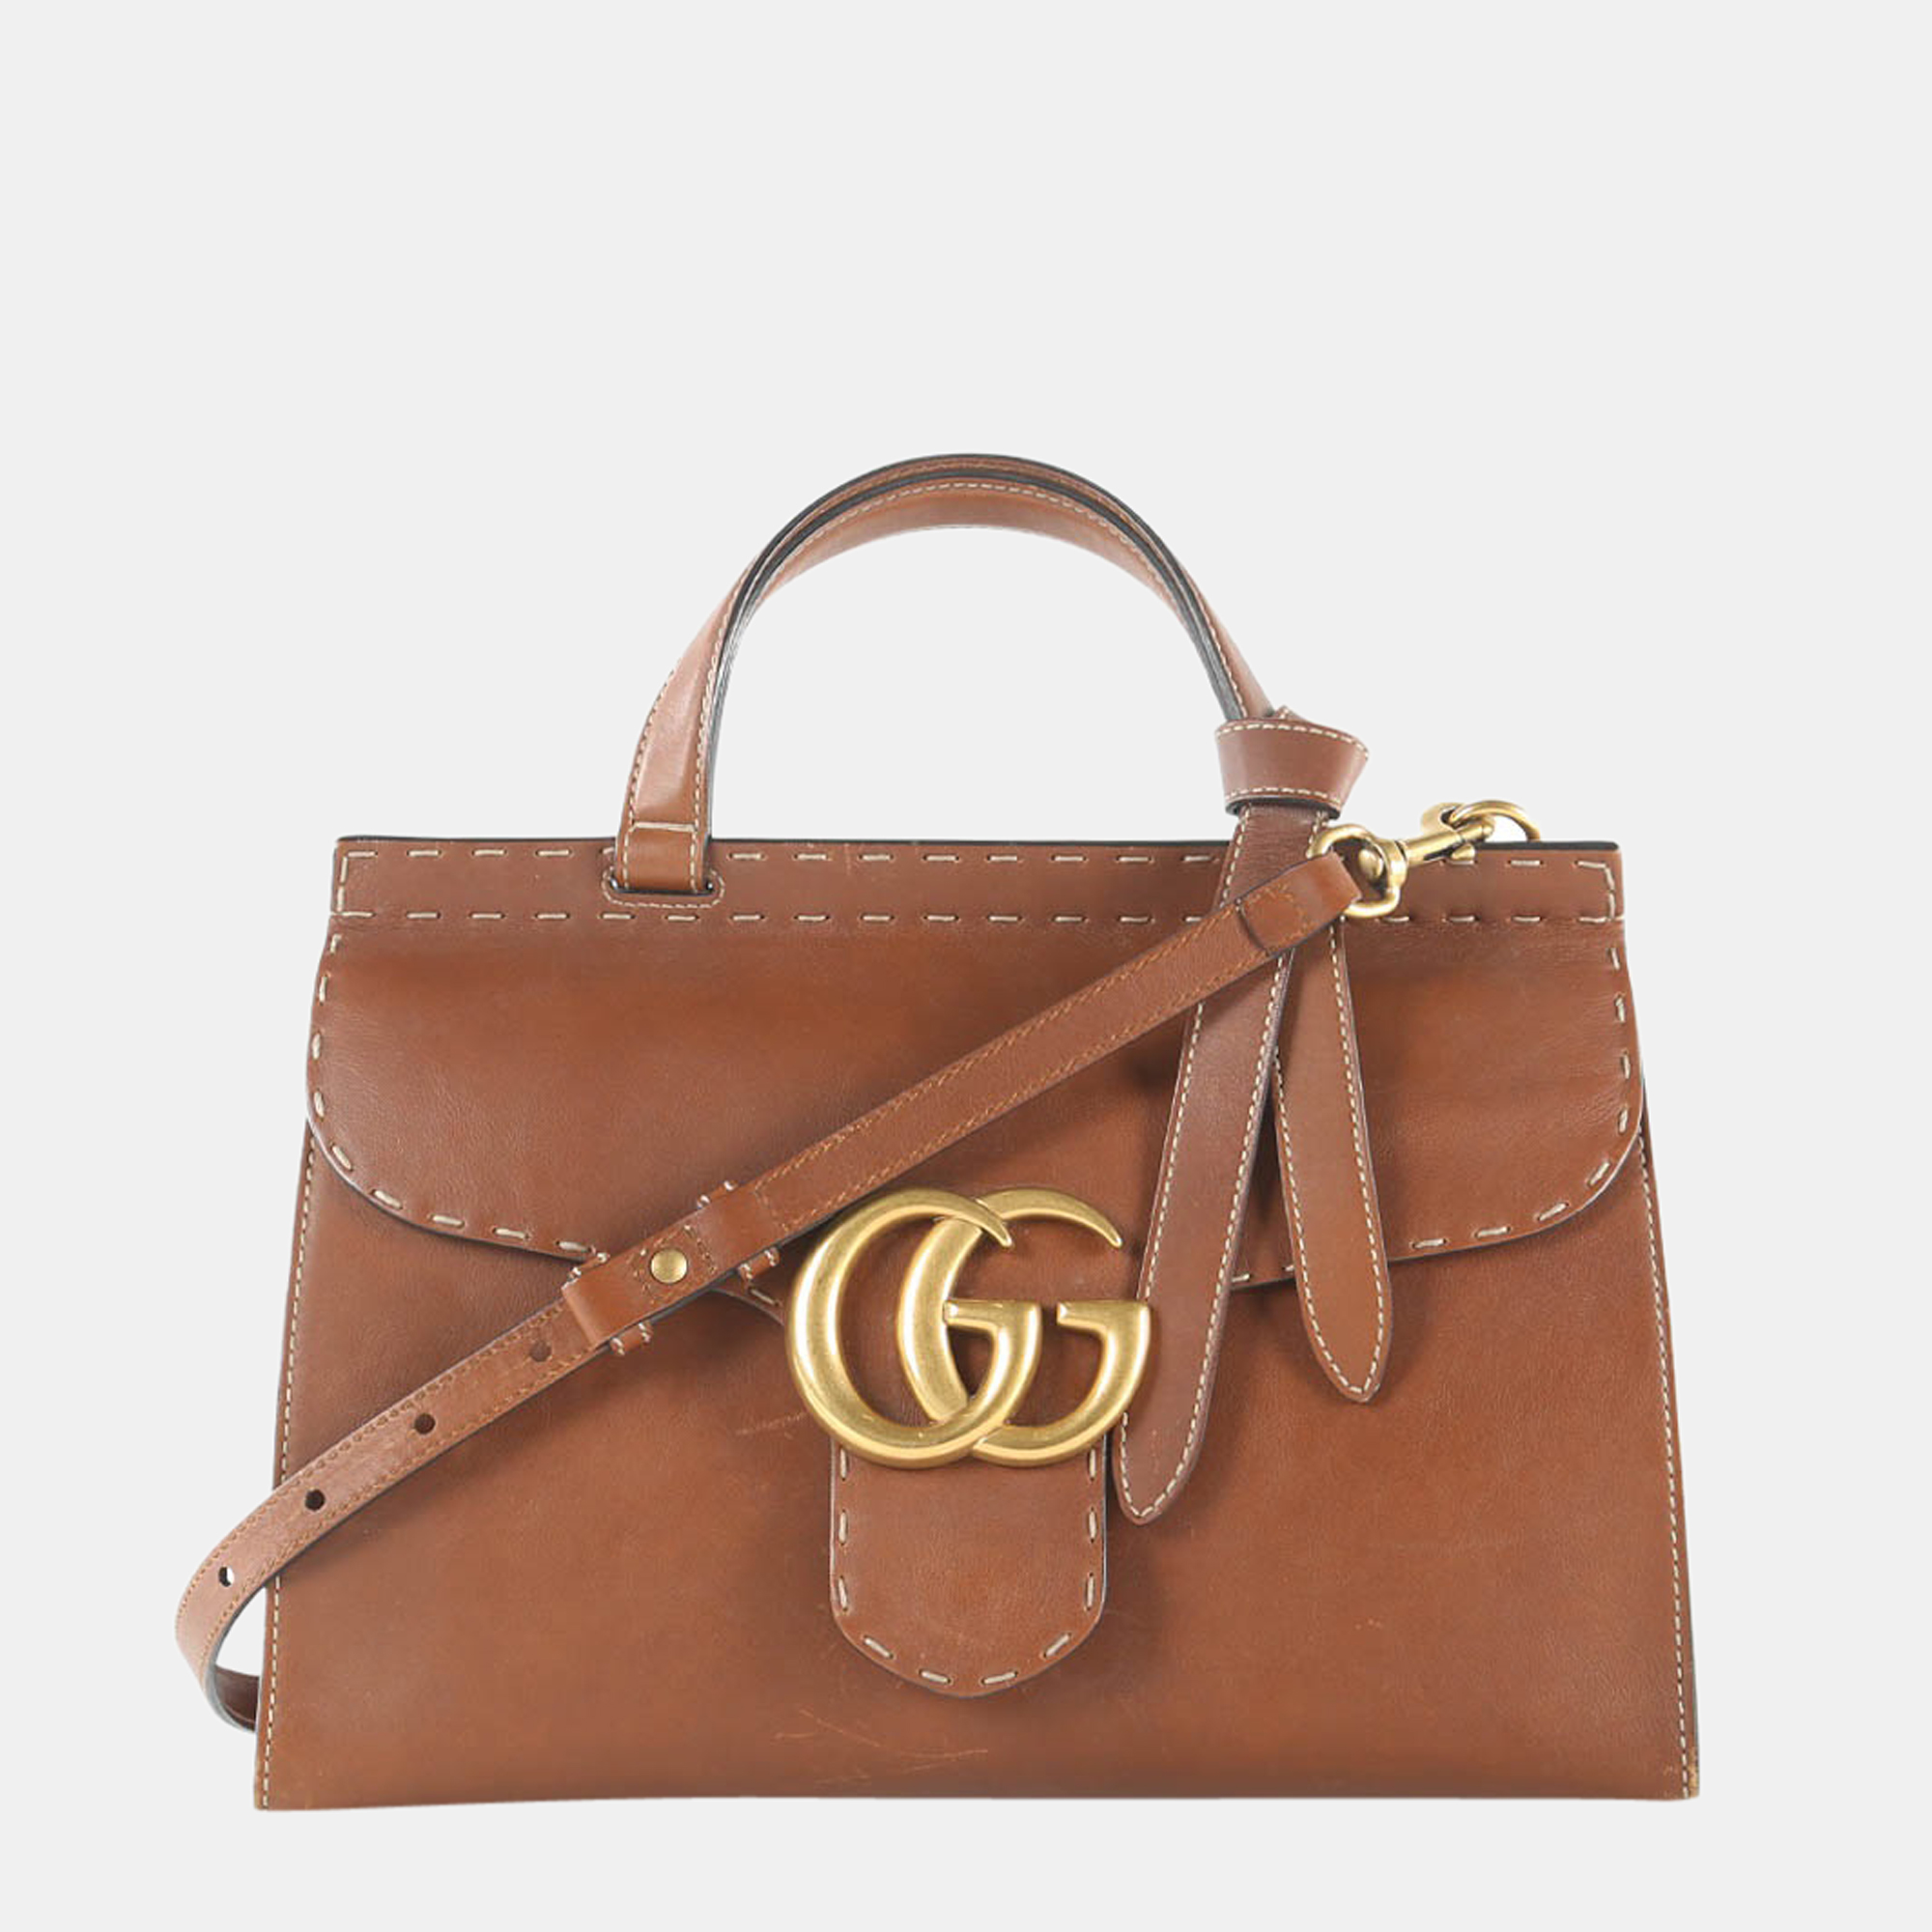 Gucci Tan Leather Marmont Top Handle Bag